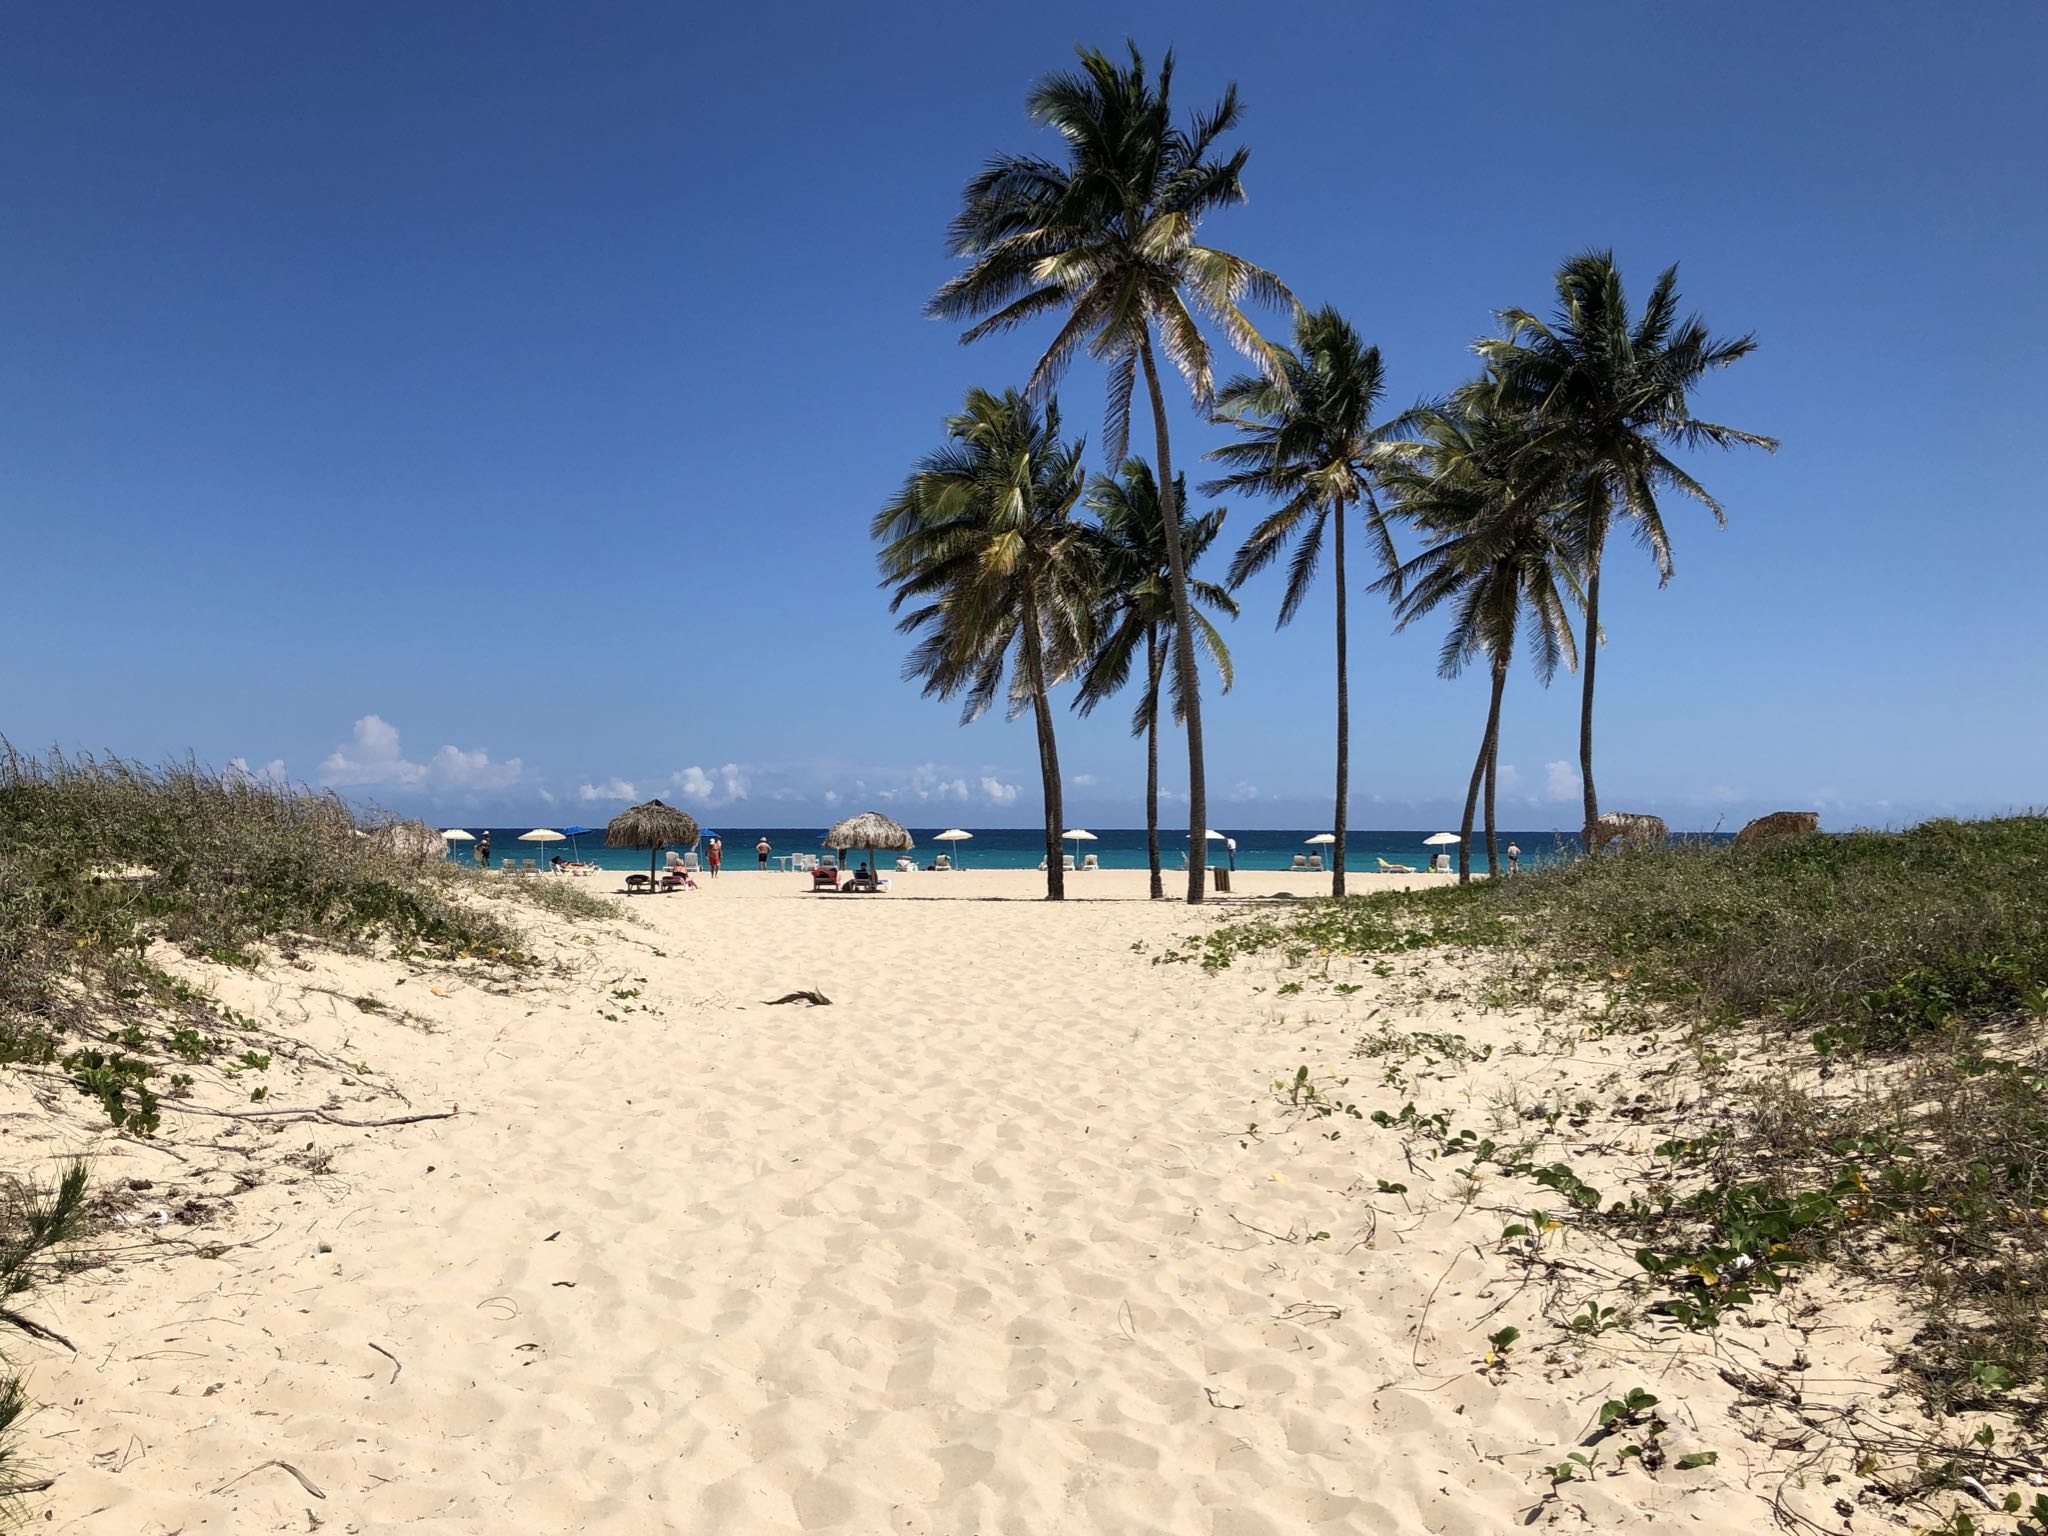 Photo 135 of 221 from the album Highlights Cuba 2019.